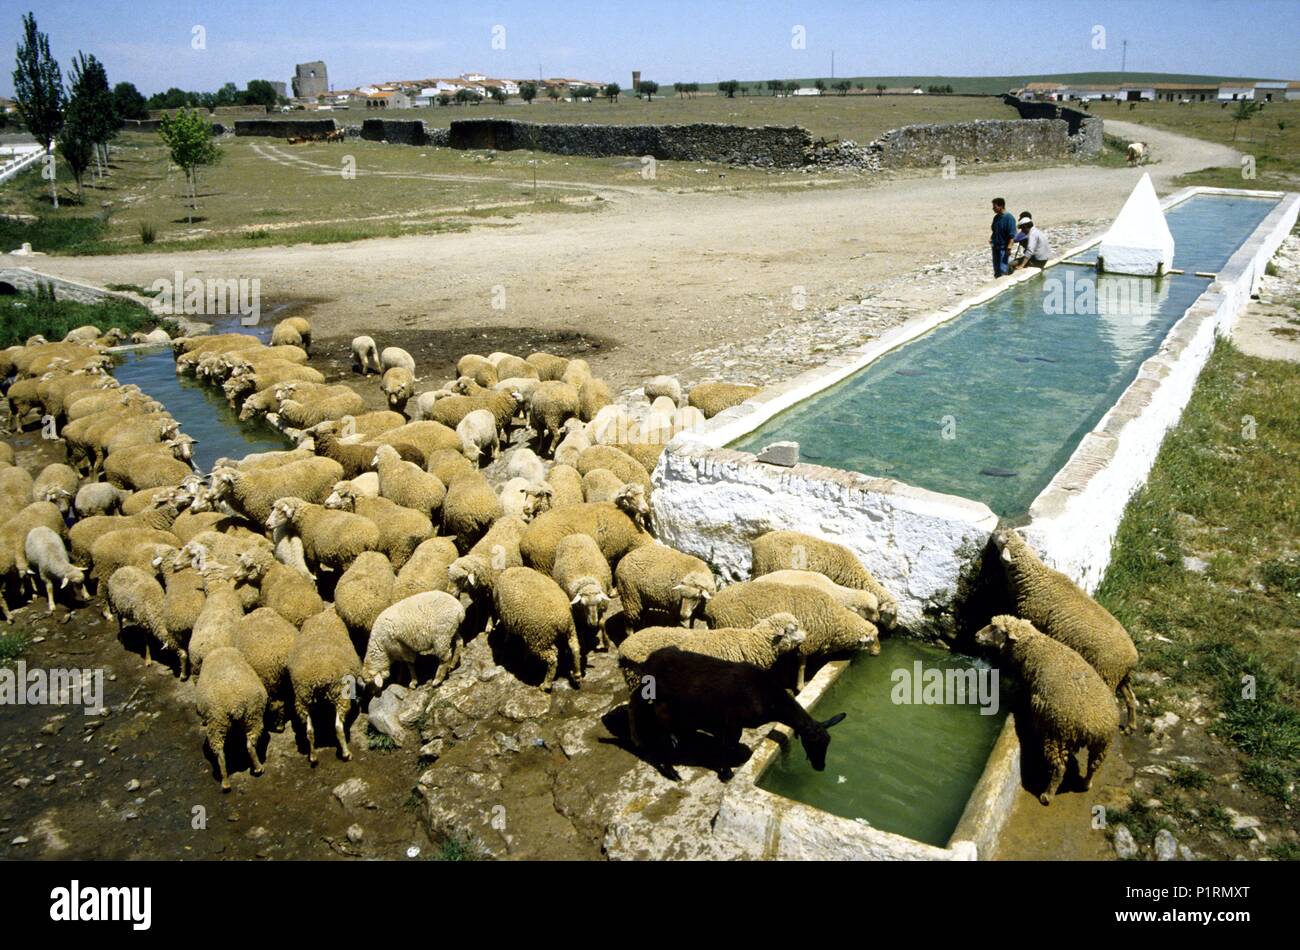 near Llerena; sheeps and watering place. Stock Photo